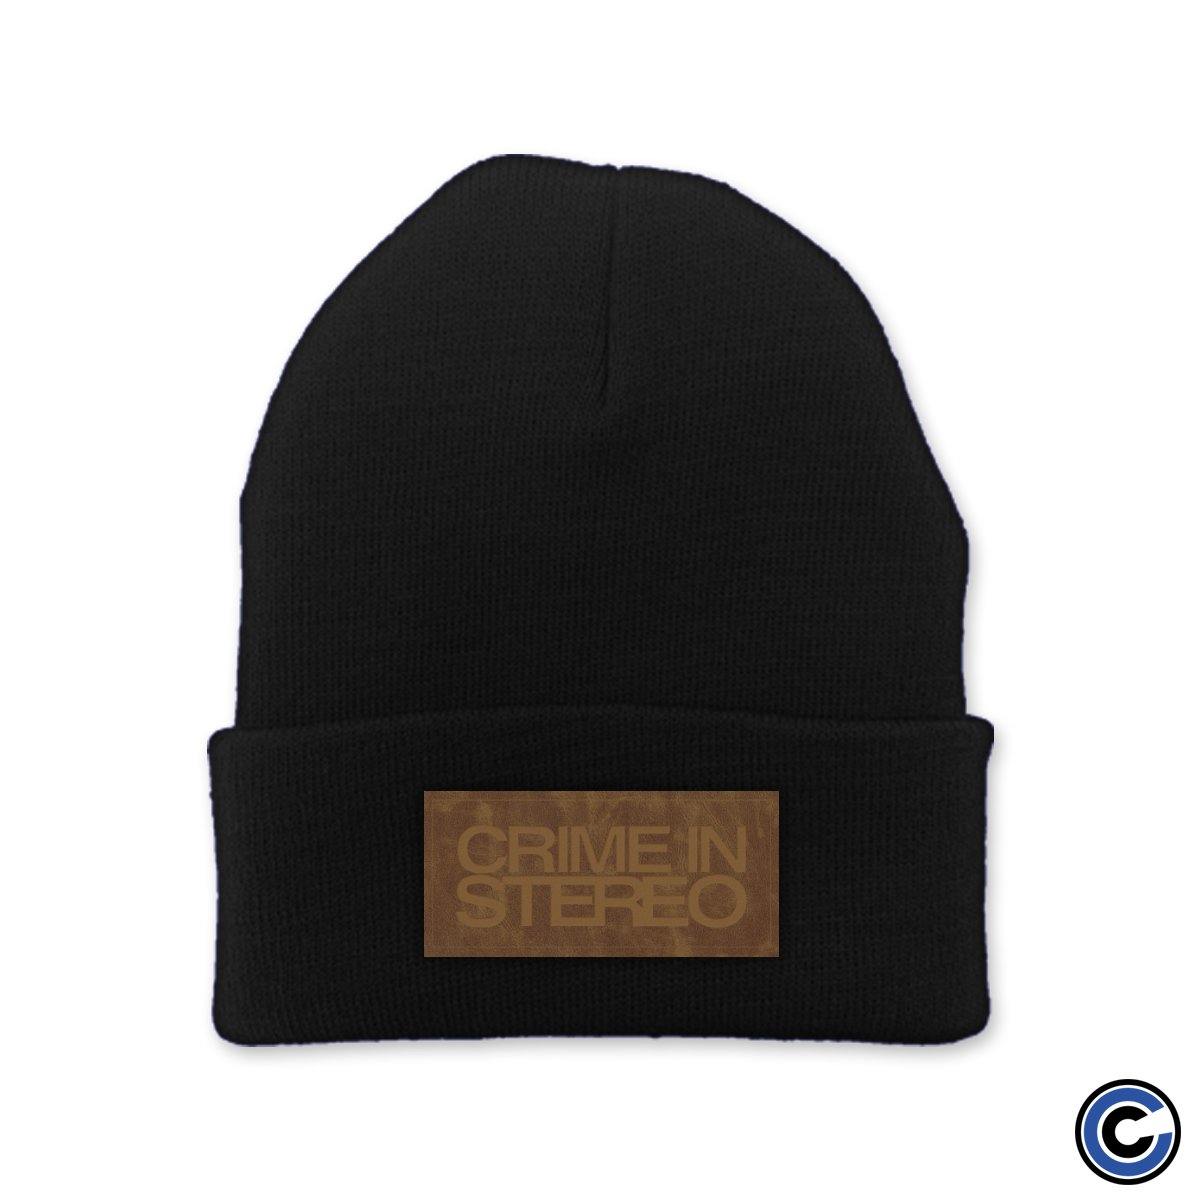 Buy – Crime In Stereo "Stacked Logo" Beanie – Band & Music Merch – Cold Cuts Merch